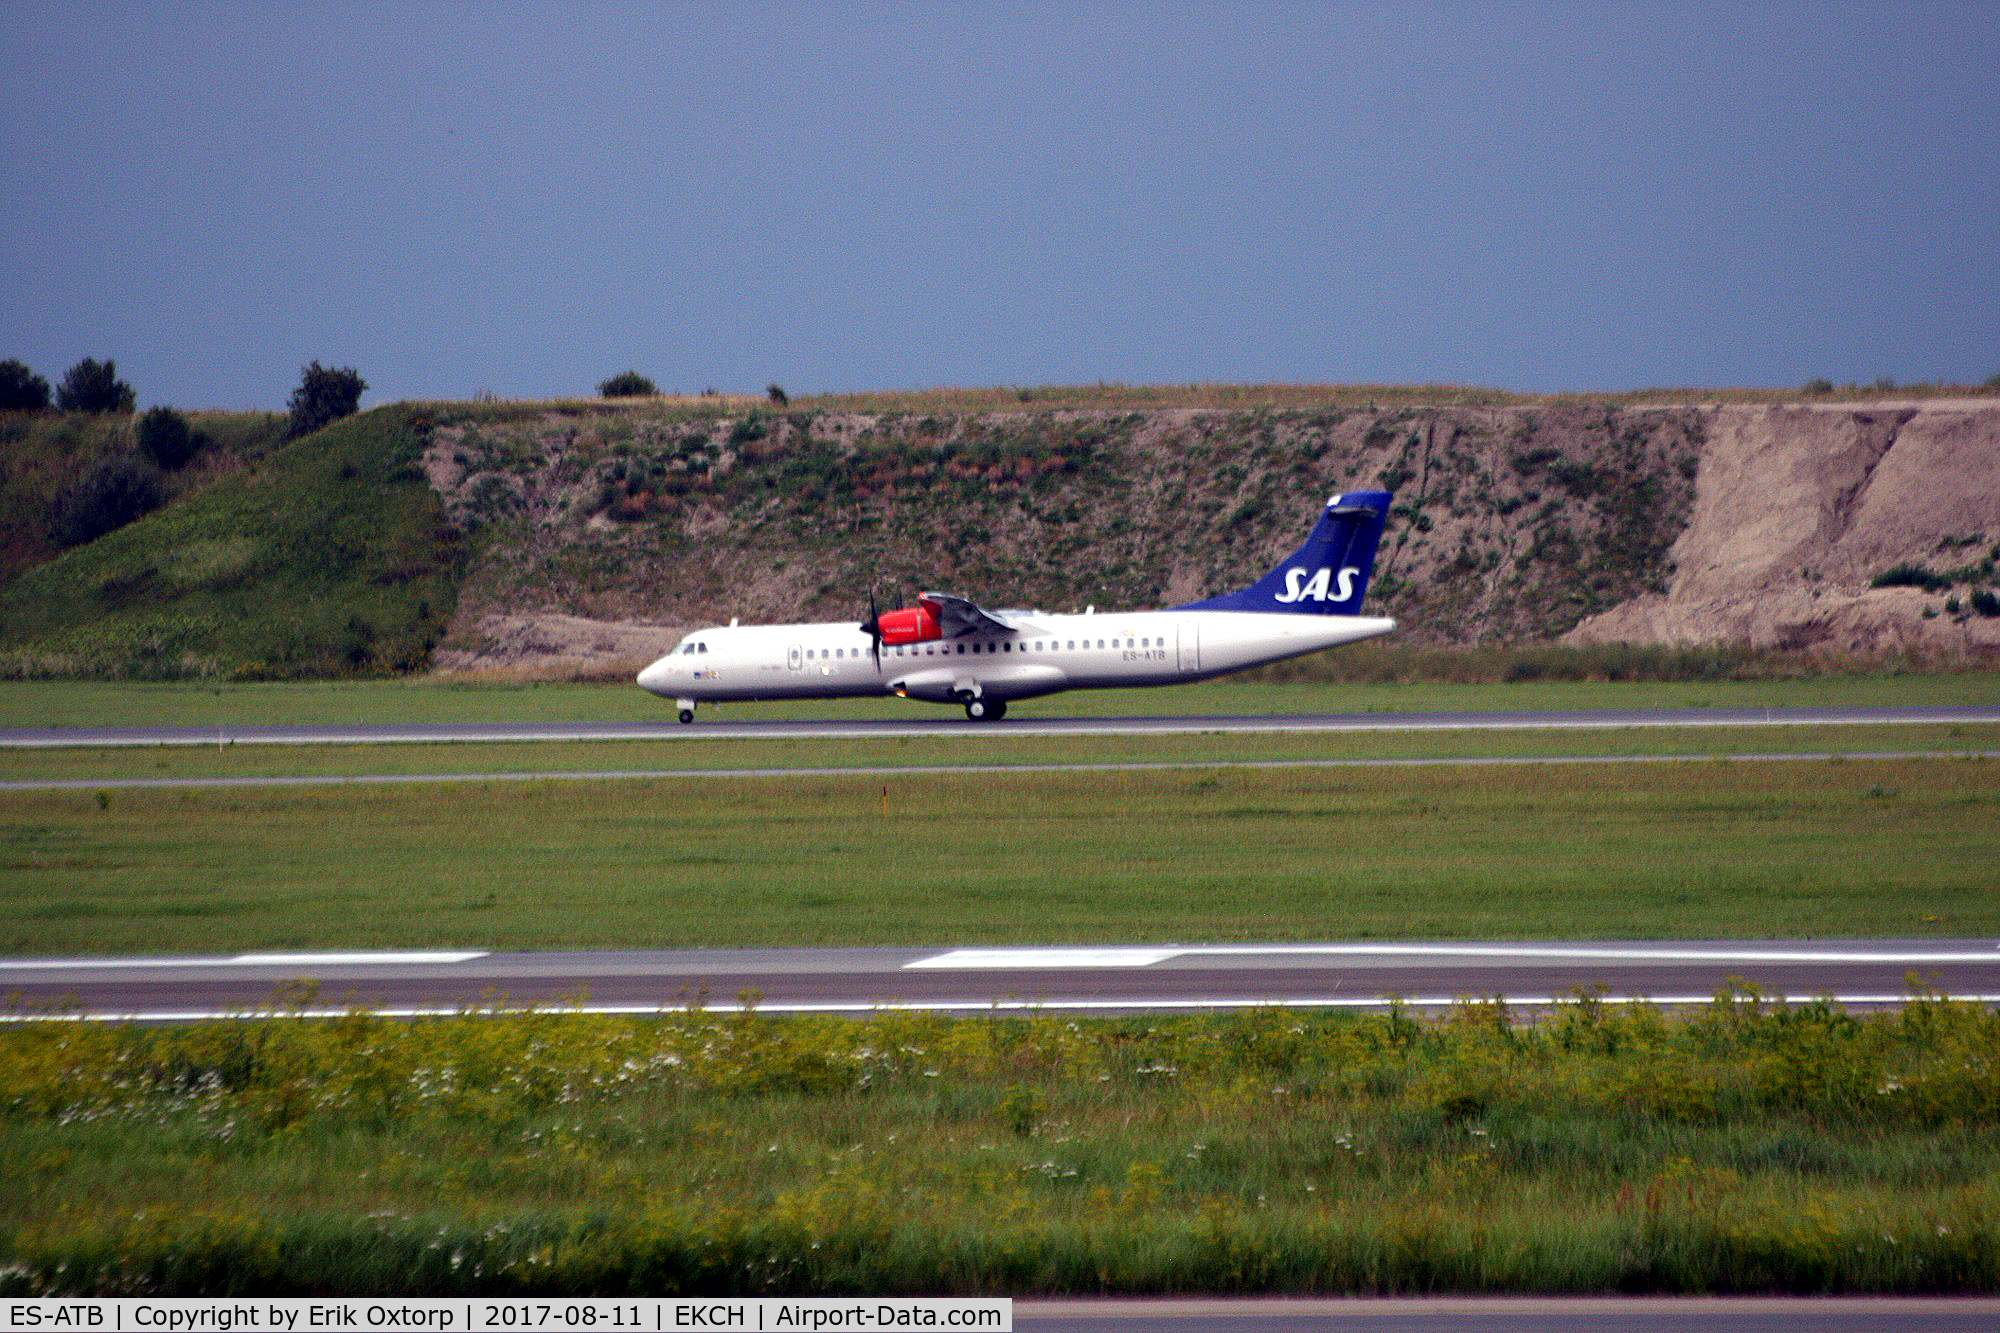 ES-ATB, 2012 ATR 72-600 (72-212A) C/N 1028, ES-ATB delivered to day from TLL (10AUG17).Landed rw 04R in stead og 04L.That is the reason for the distance shot.